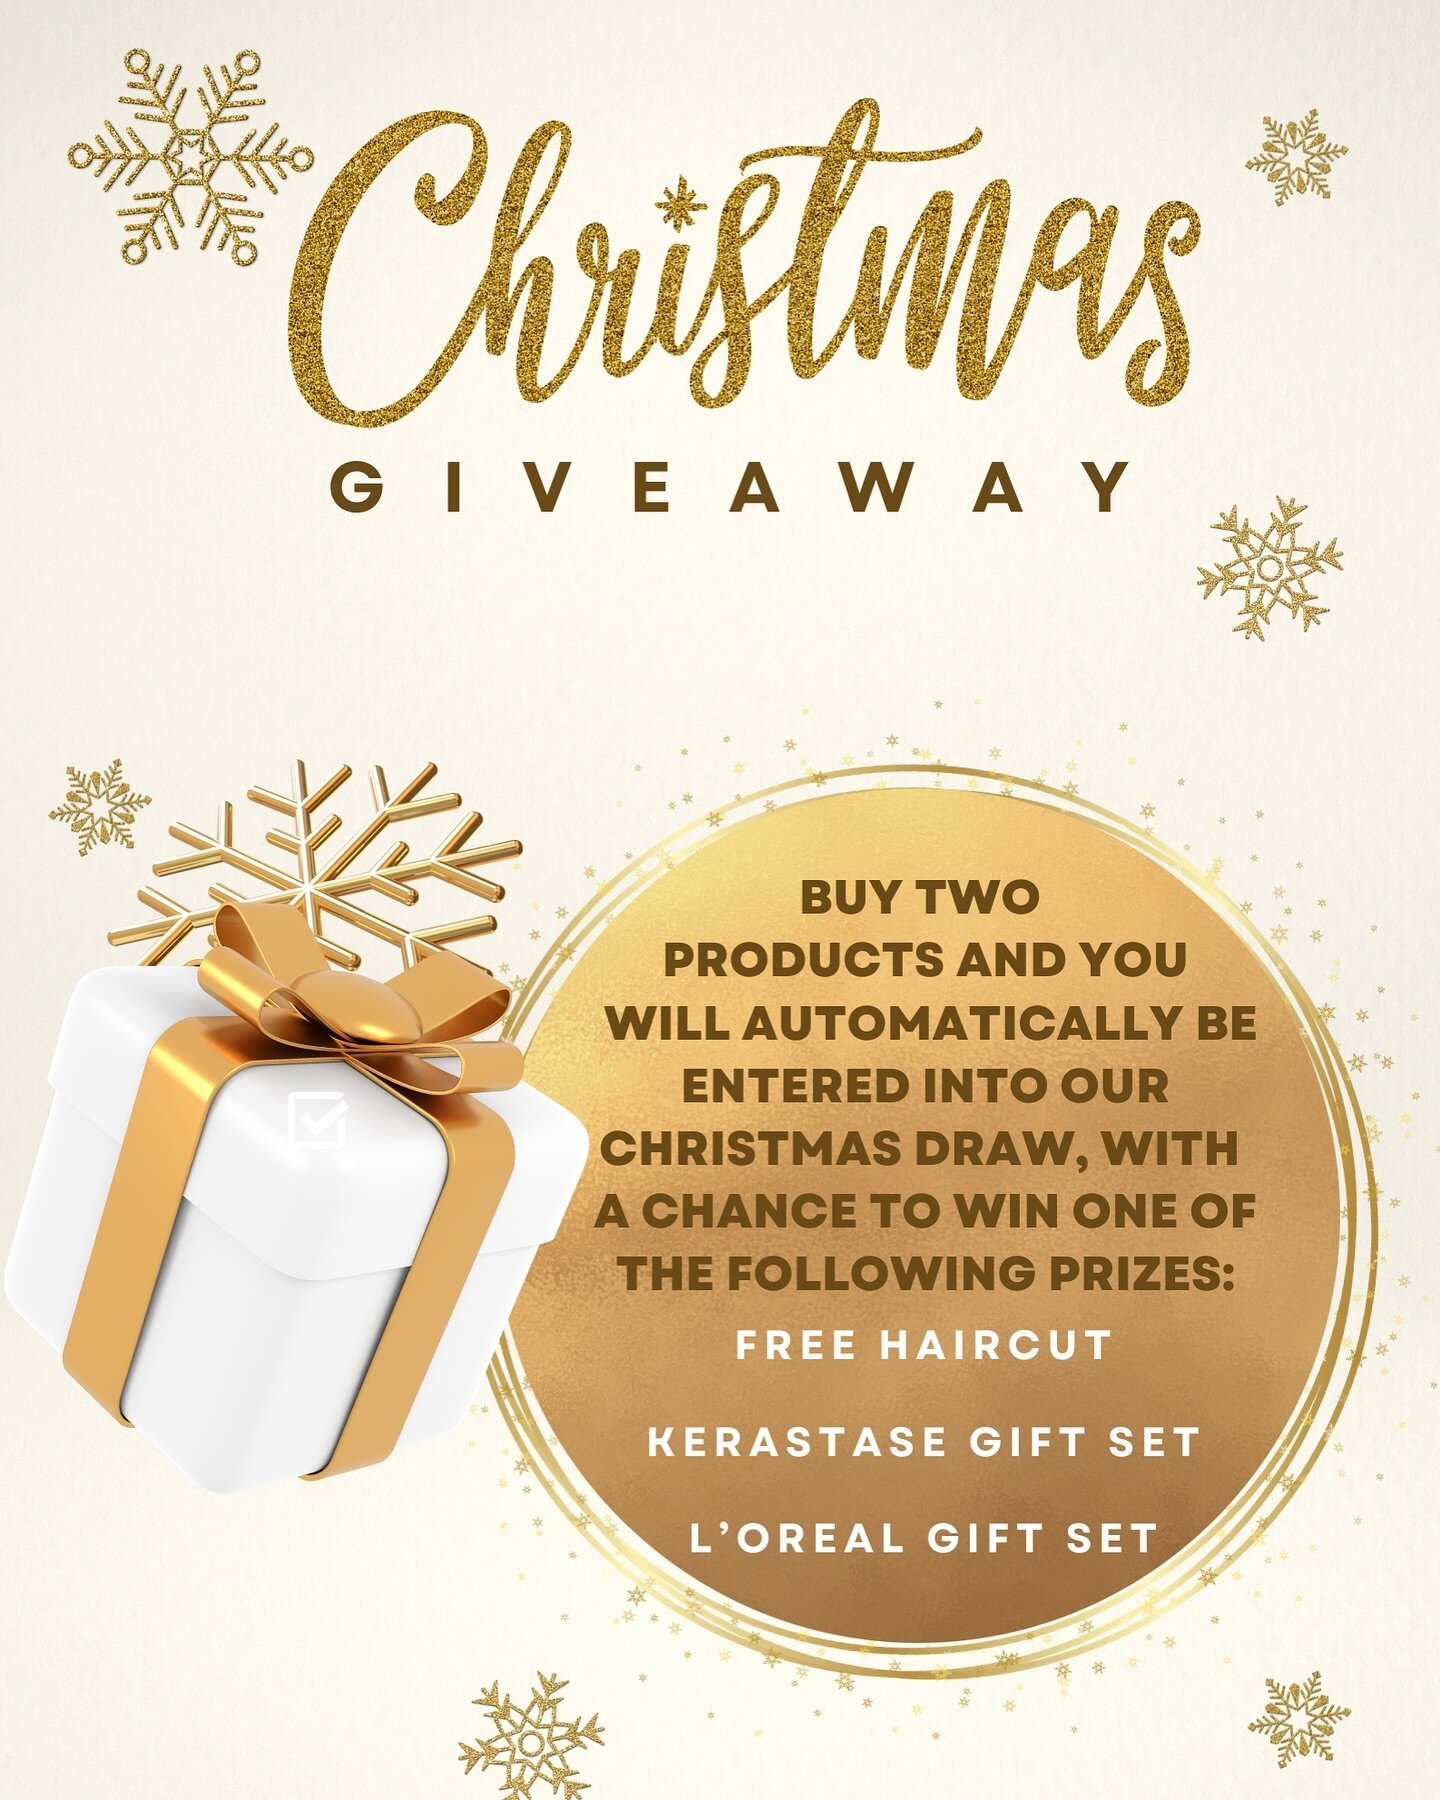 Get into the festive spirit with Tops Christmas giveaway! 🎁🎄 Buy two products and get a chance to win one of three amazing prizes including a free haircut, Kerastase gift set, or L'Oreal gift set. Don't miss out on this exciting opportunity to trea